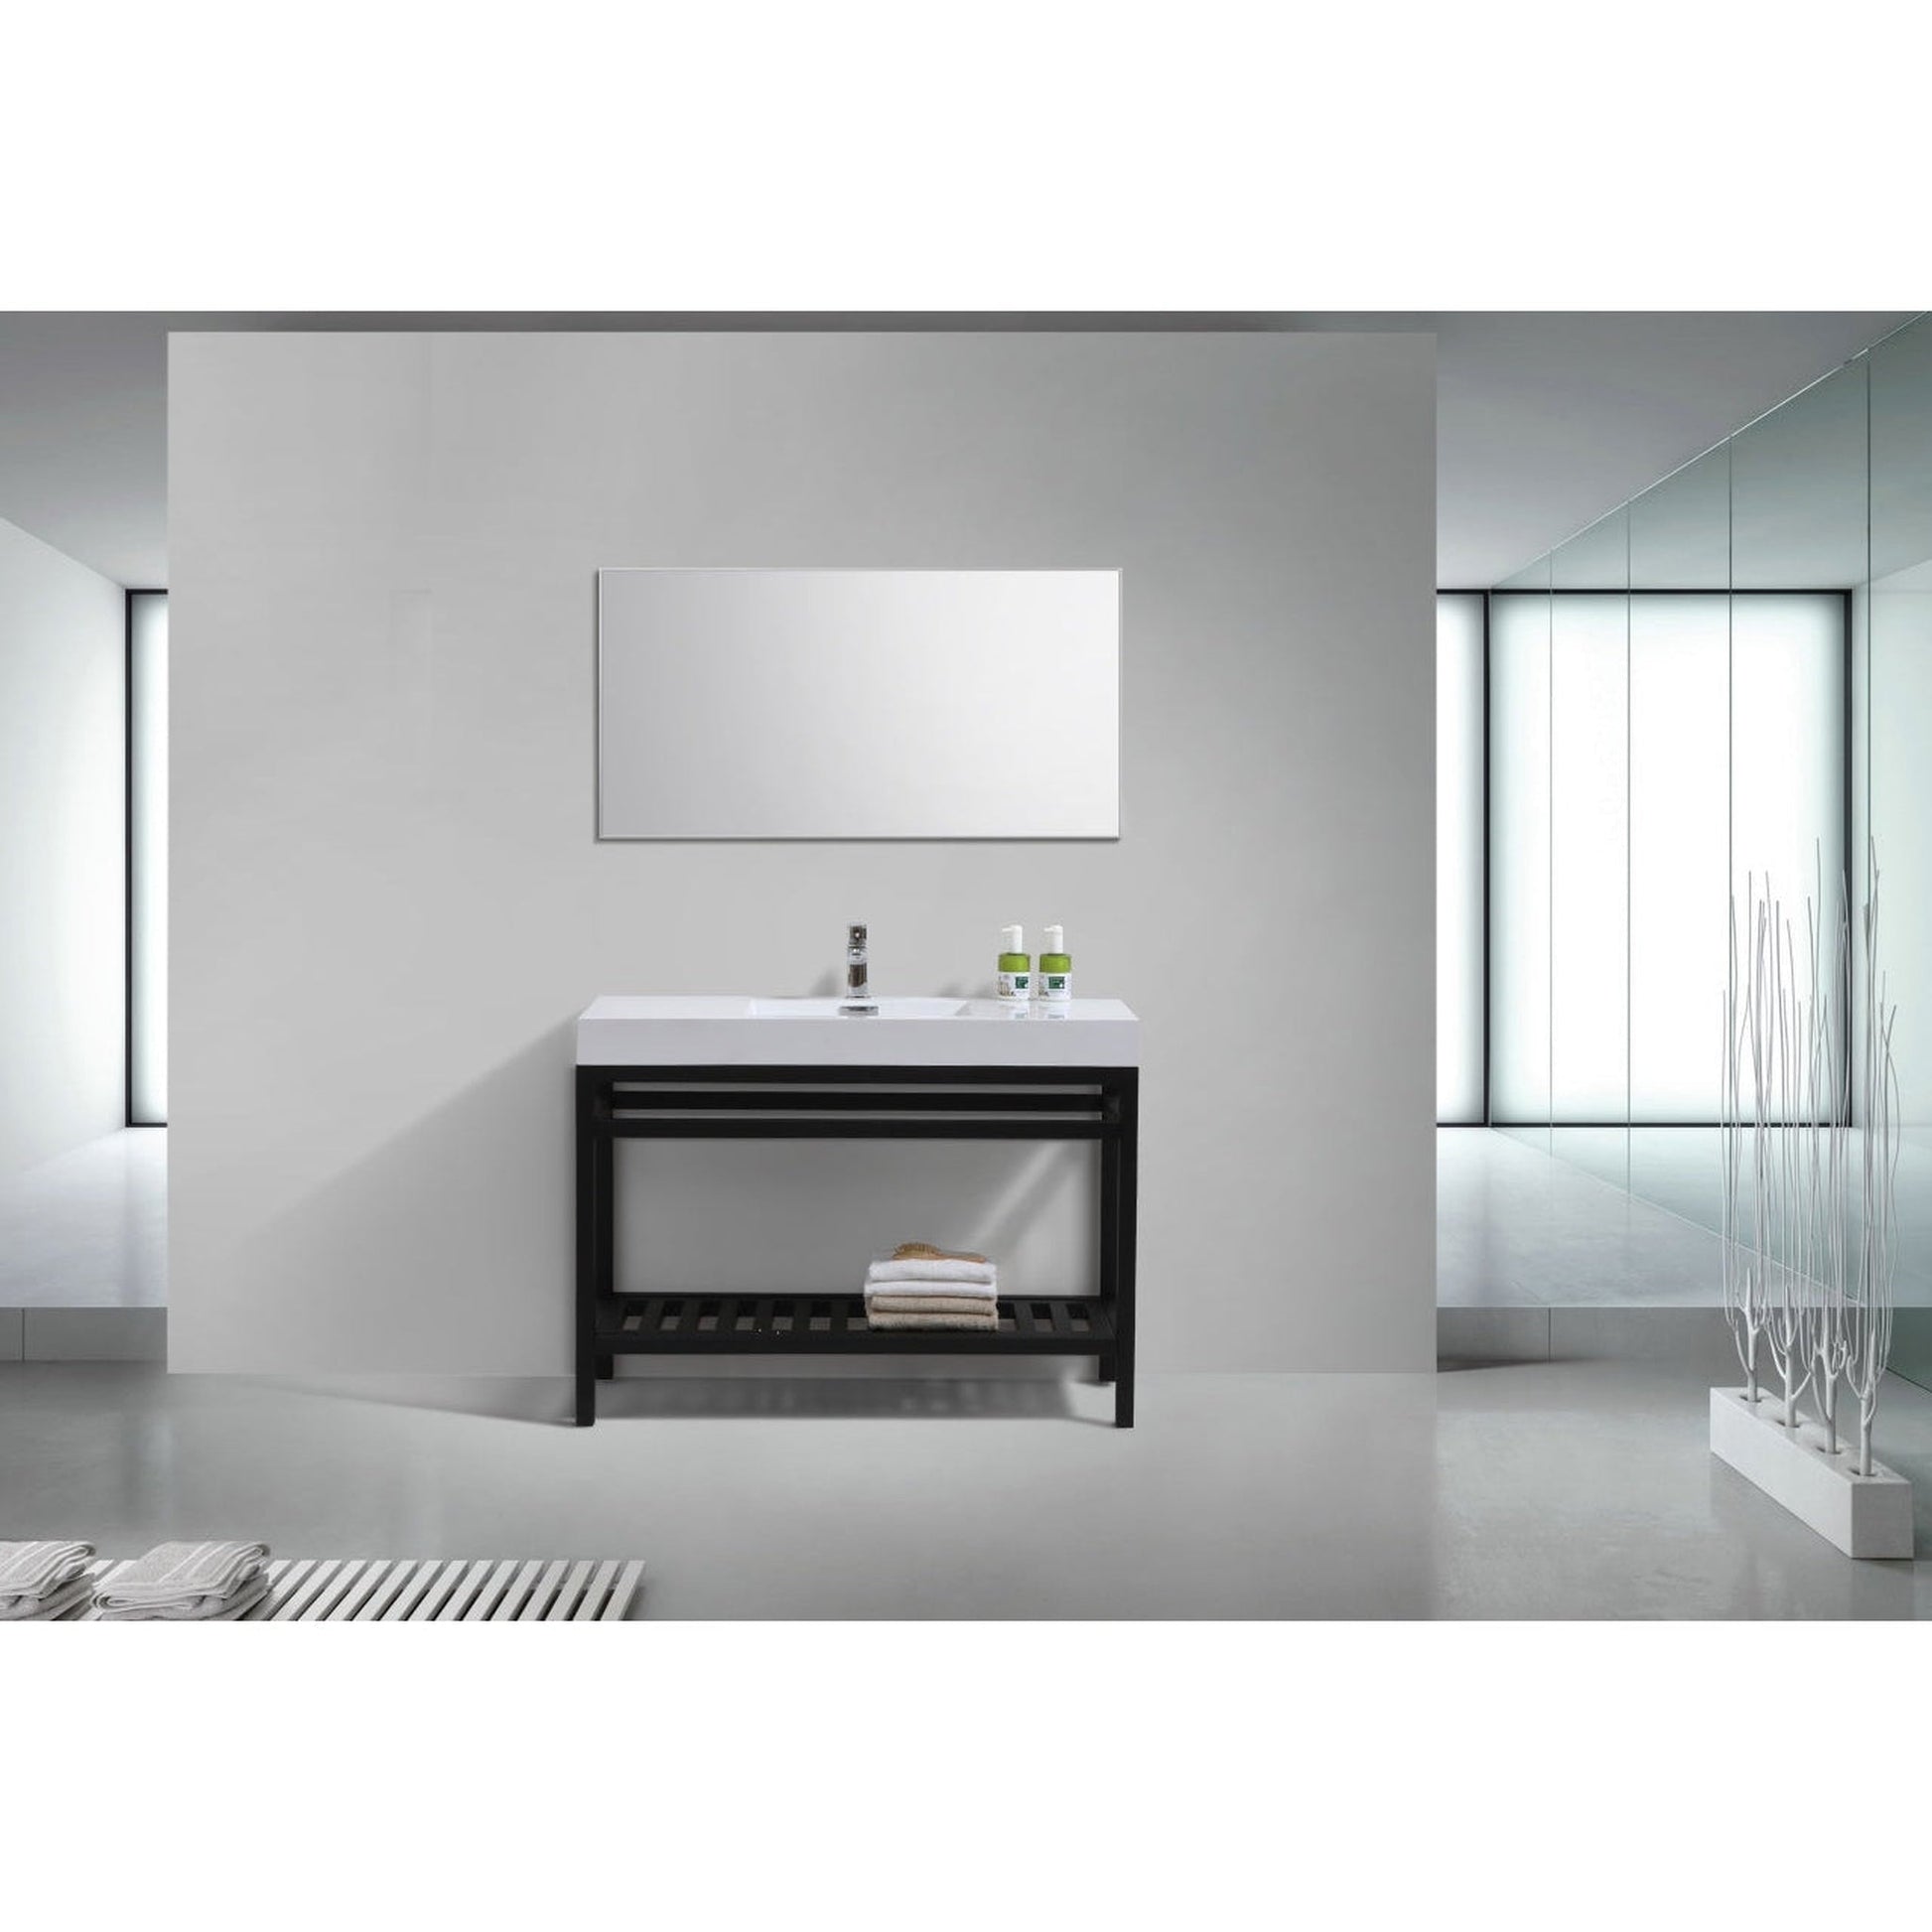 KubeBath Cisco 48" Stainless Steel Matte Black Console Freestanding Modern Bathroom Vanity With Single Integrated Acrylic Sink With Overflow